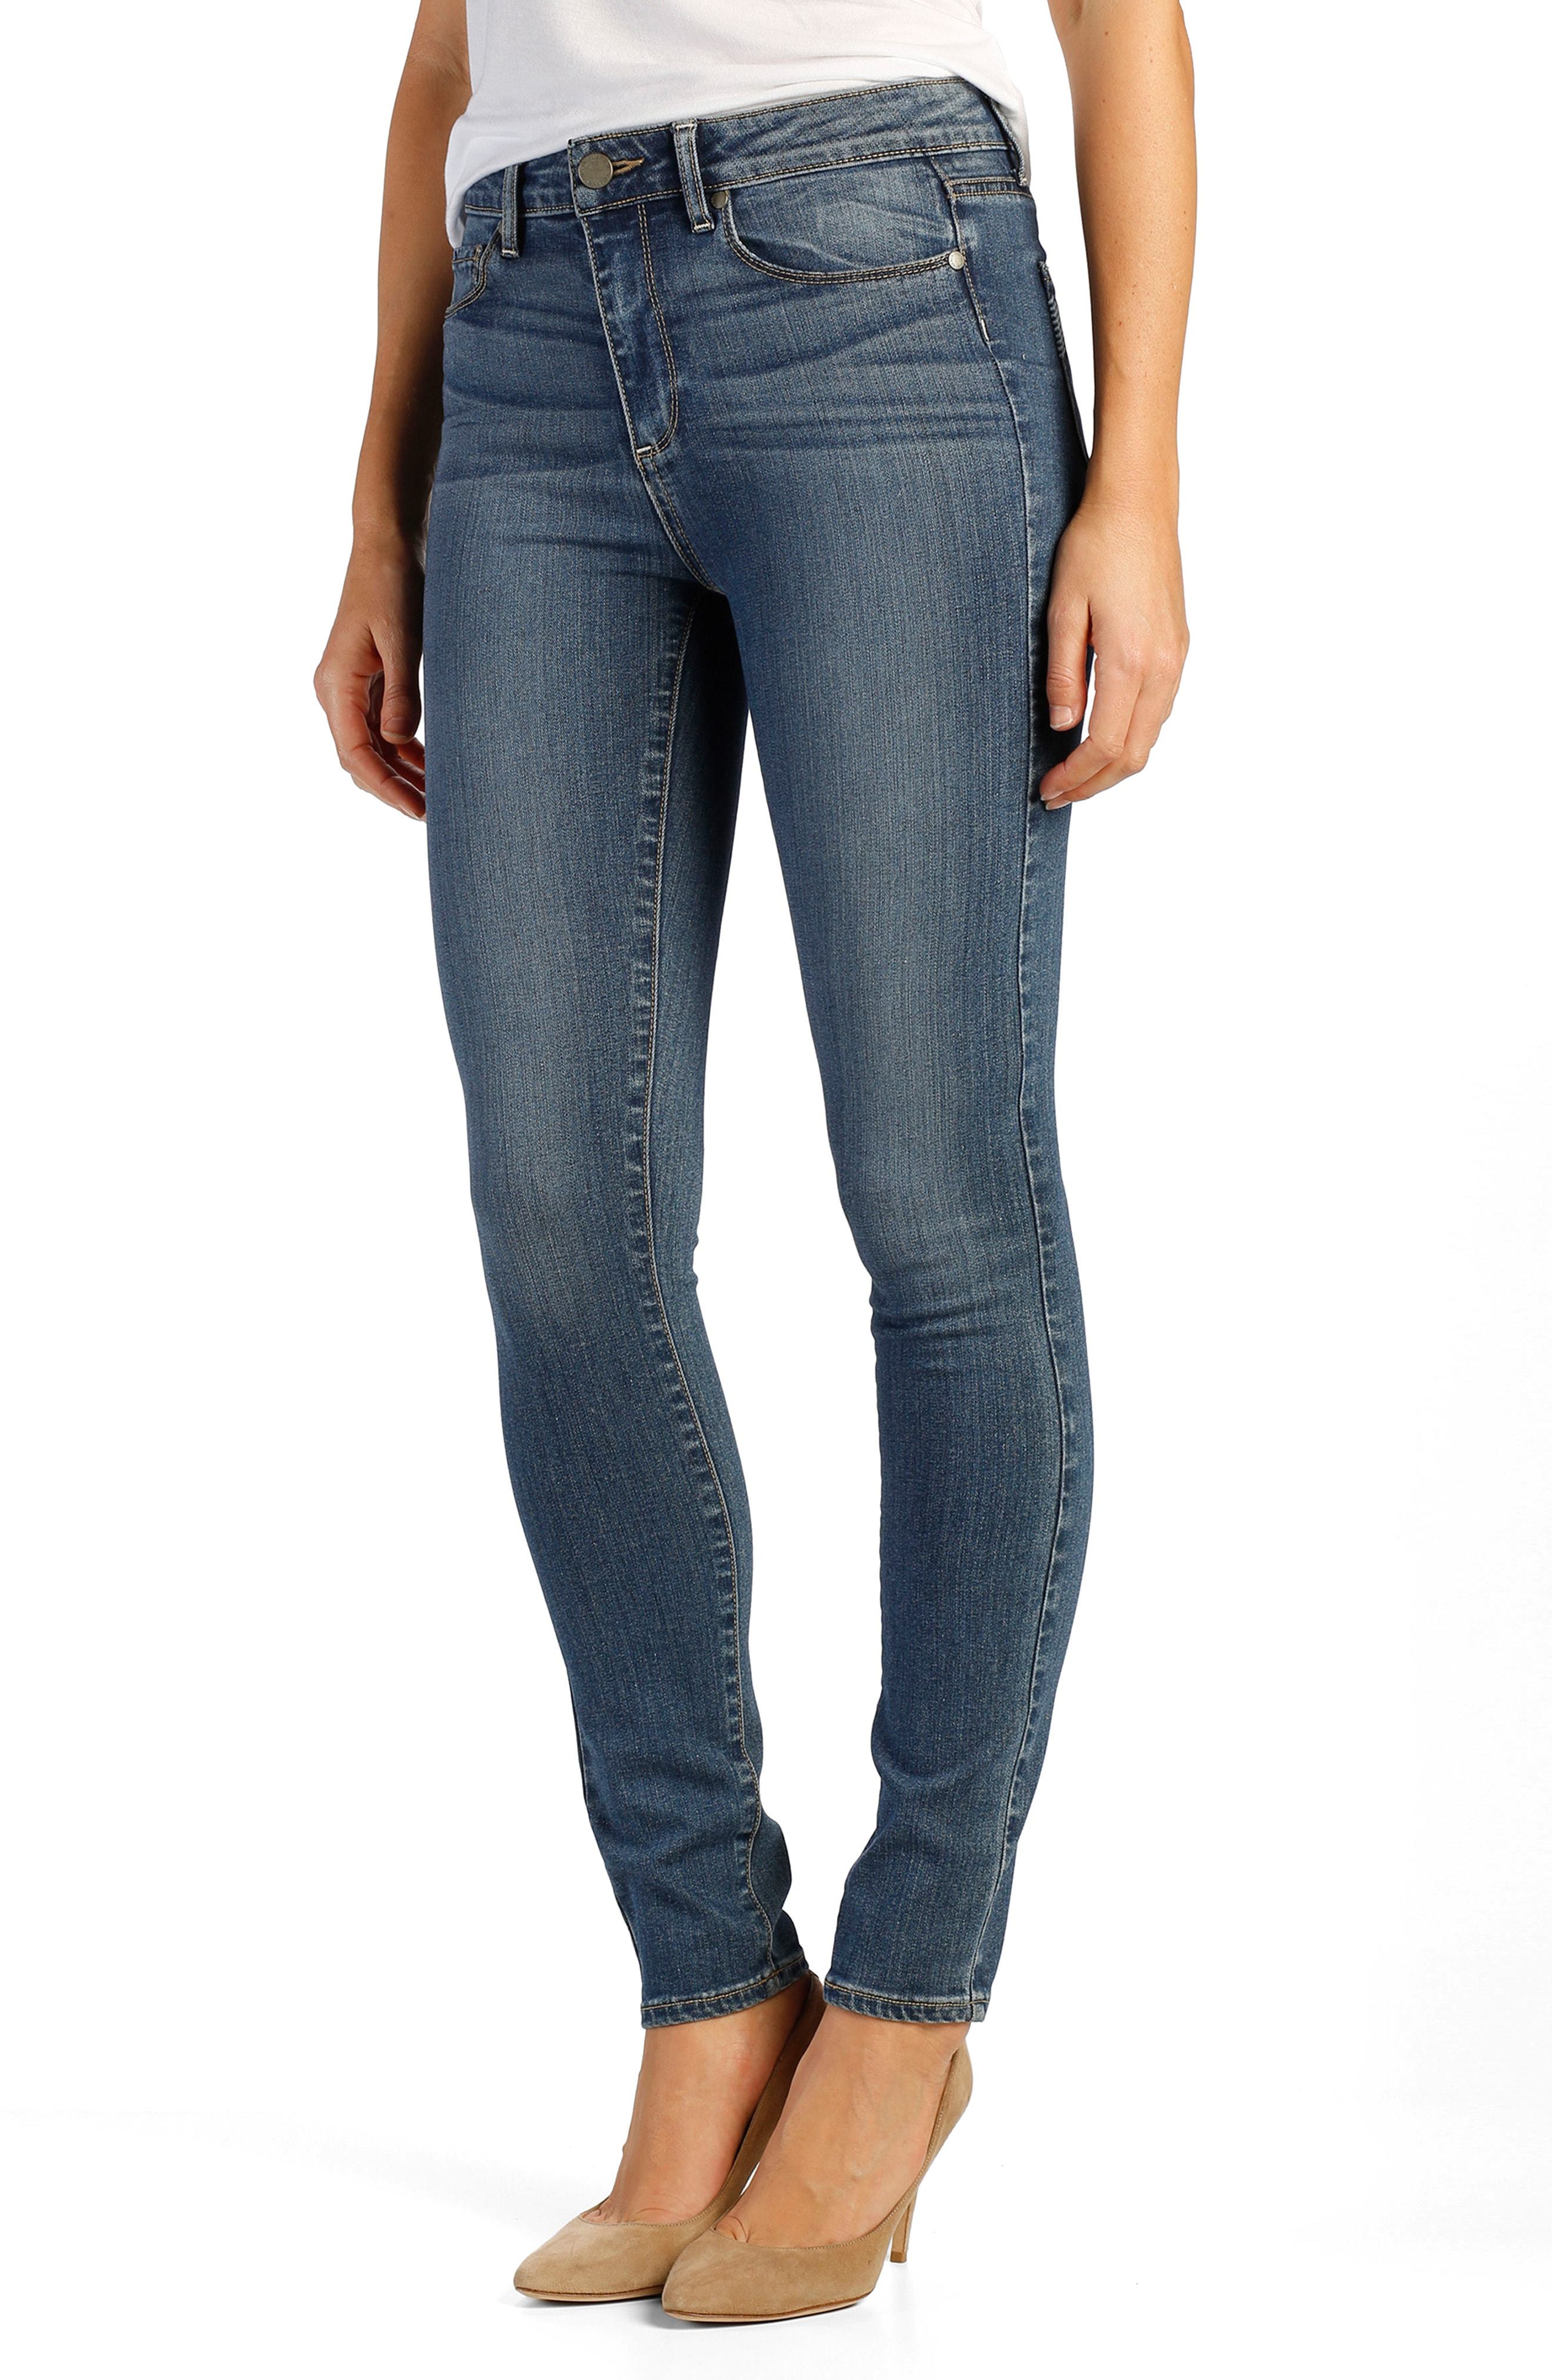 Paige Transcend Hoxton High Rise Ultra Skinny Jeans, $189 | Nordstrom ...